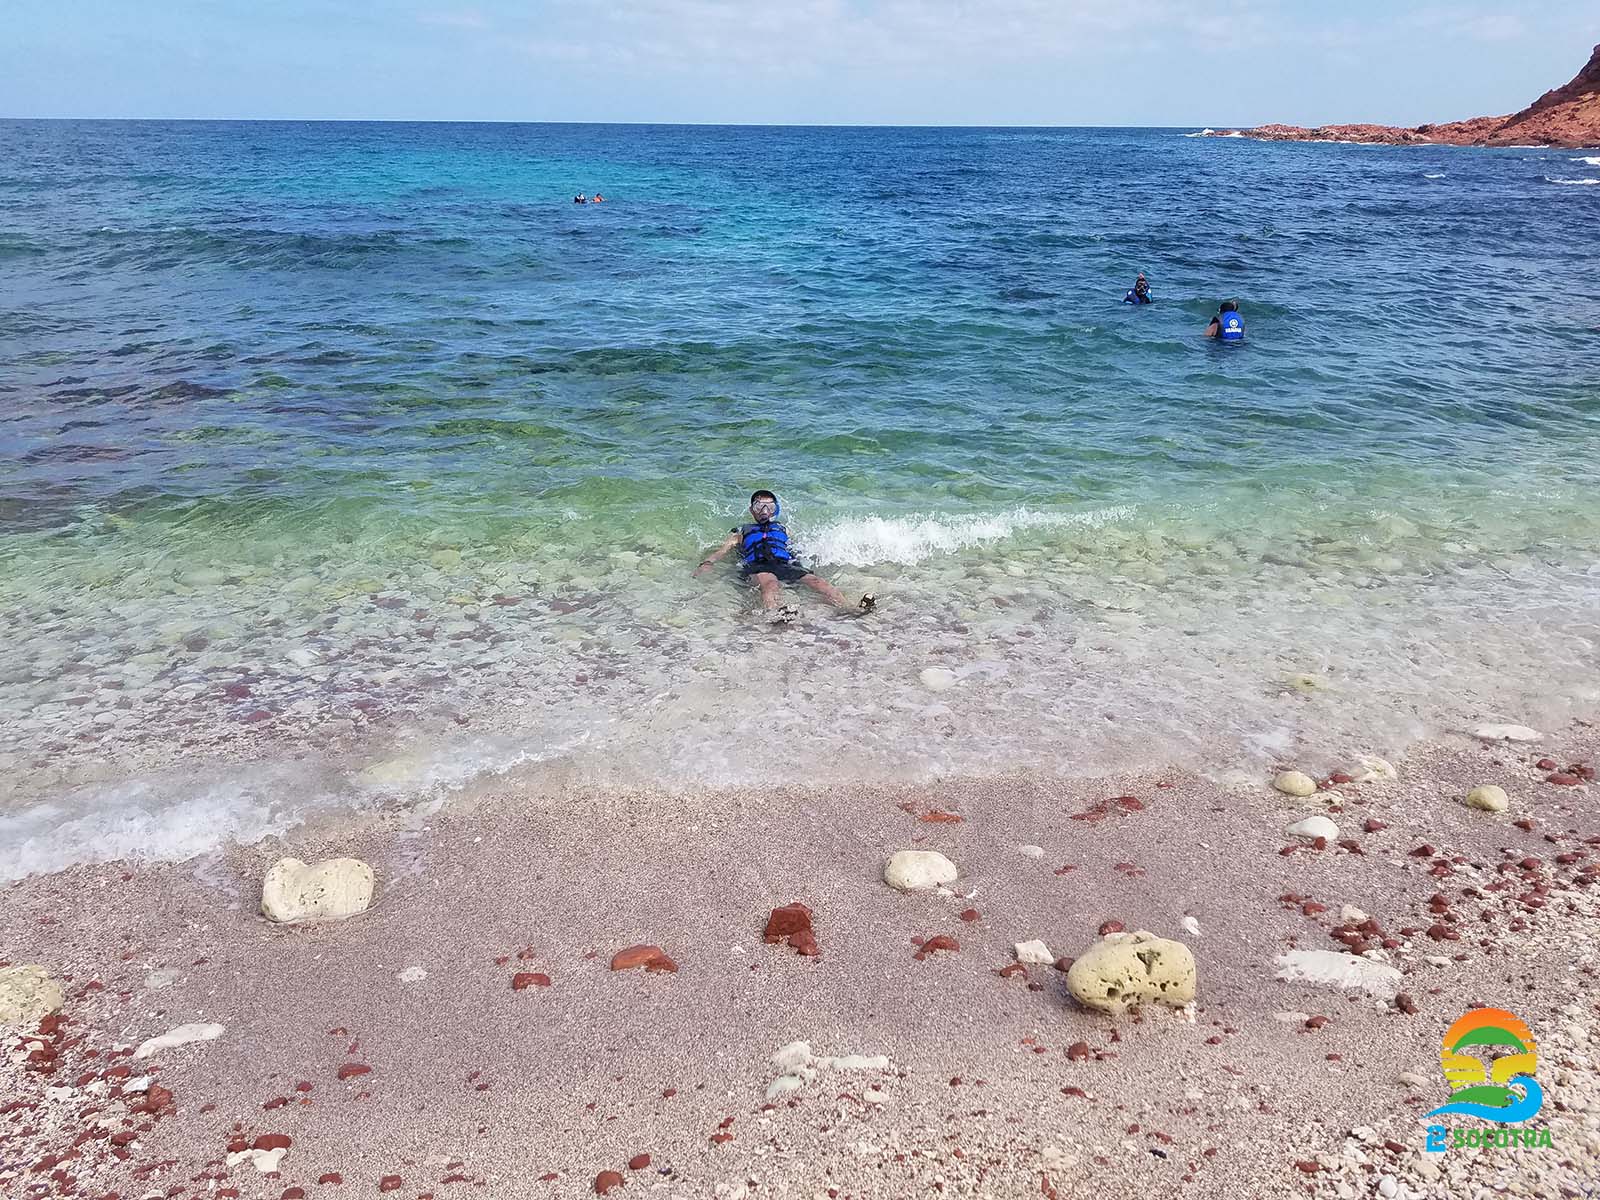 Snorkeling and diving to see the colorful fish, Dihamri Marine Protected Area, Socotra Island